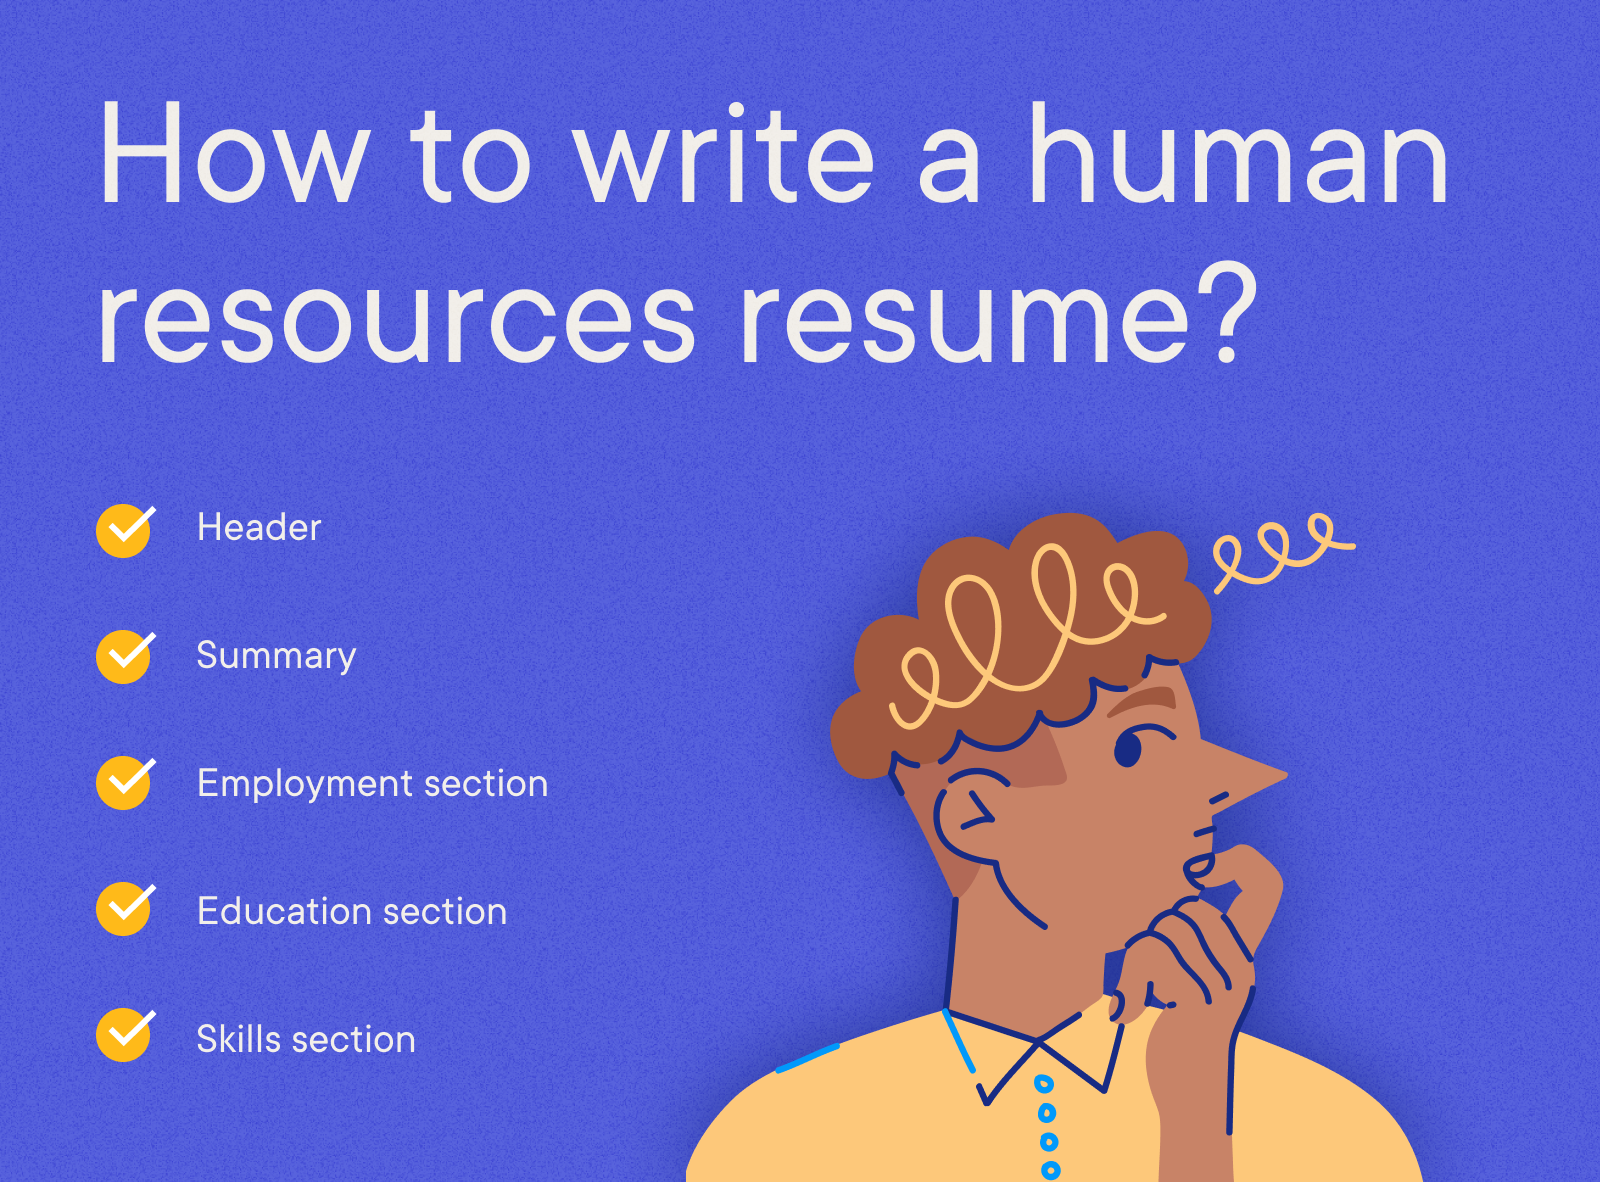 Human Resources - How to write a Digital Marketing resume?